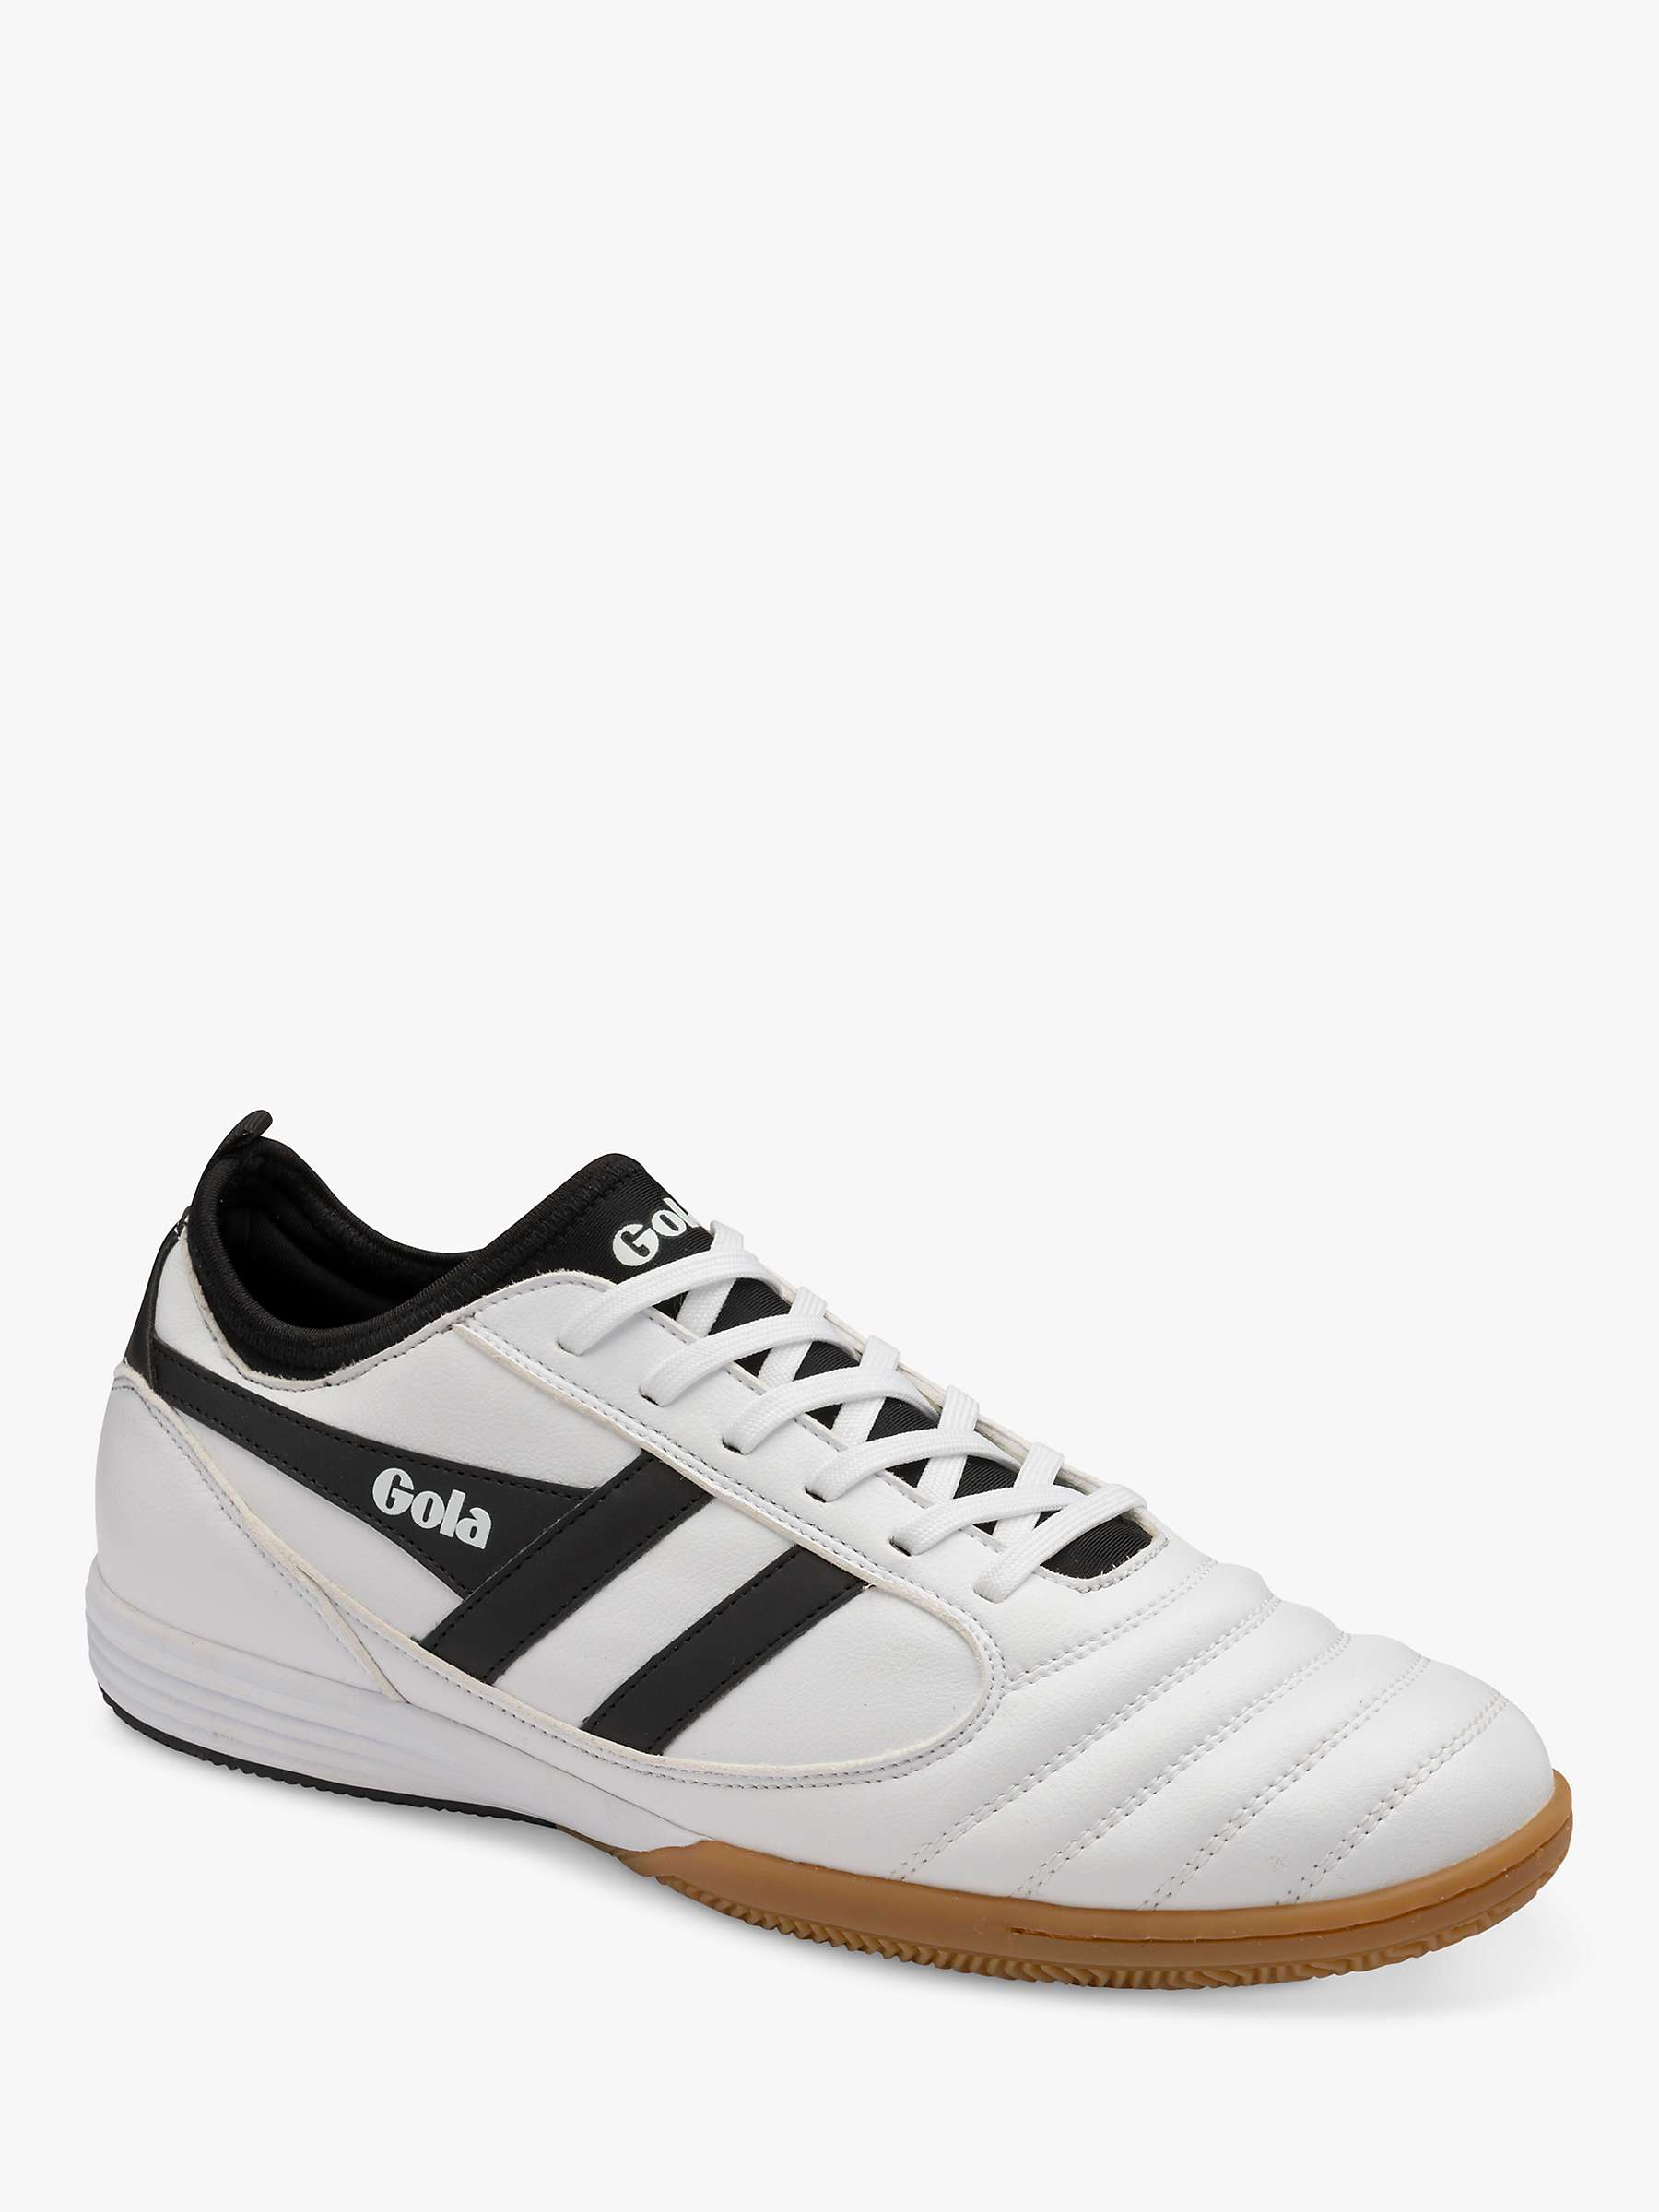 Buy Gola Performance Ceptor TX Football Trainers, White/Black Online at johnlewis.com